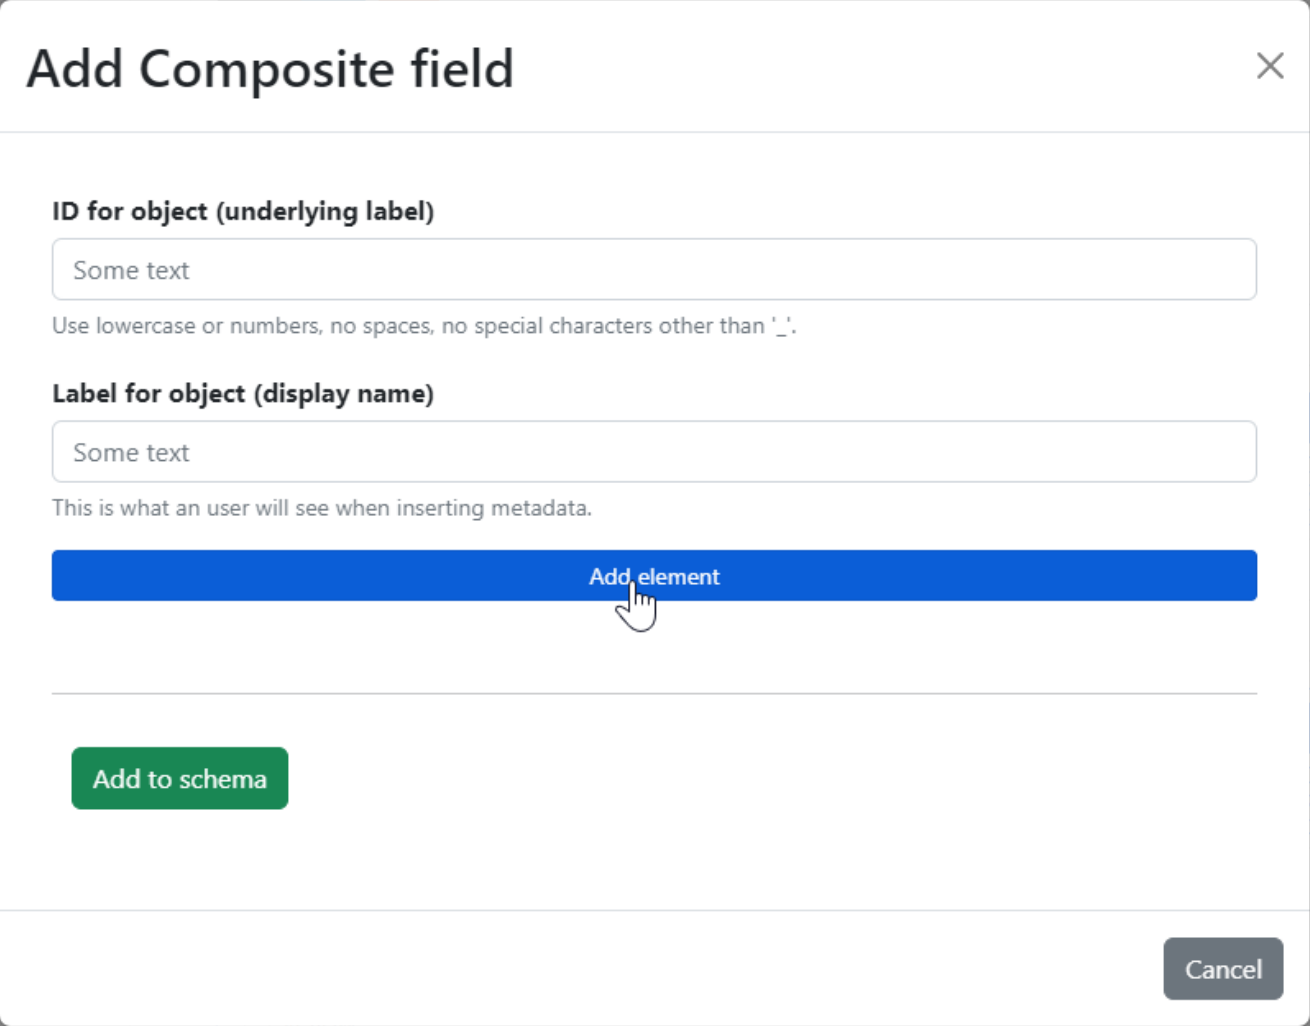 Form to create a composite field, which looks like an empty schema.